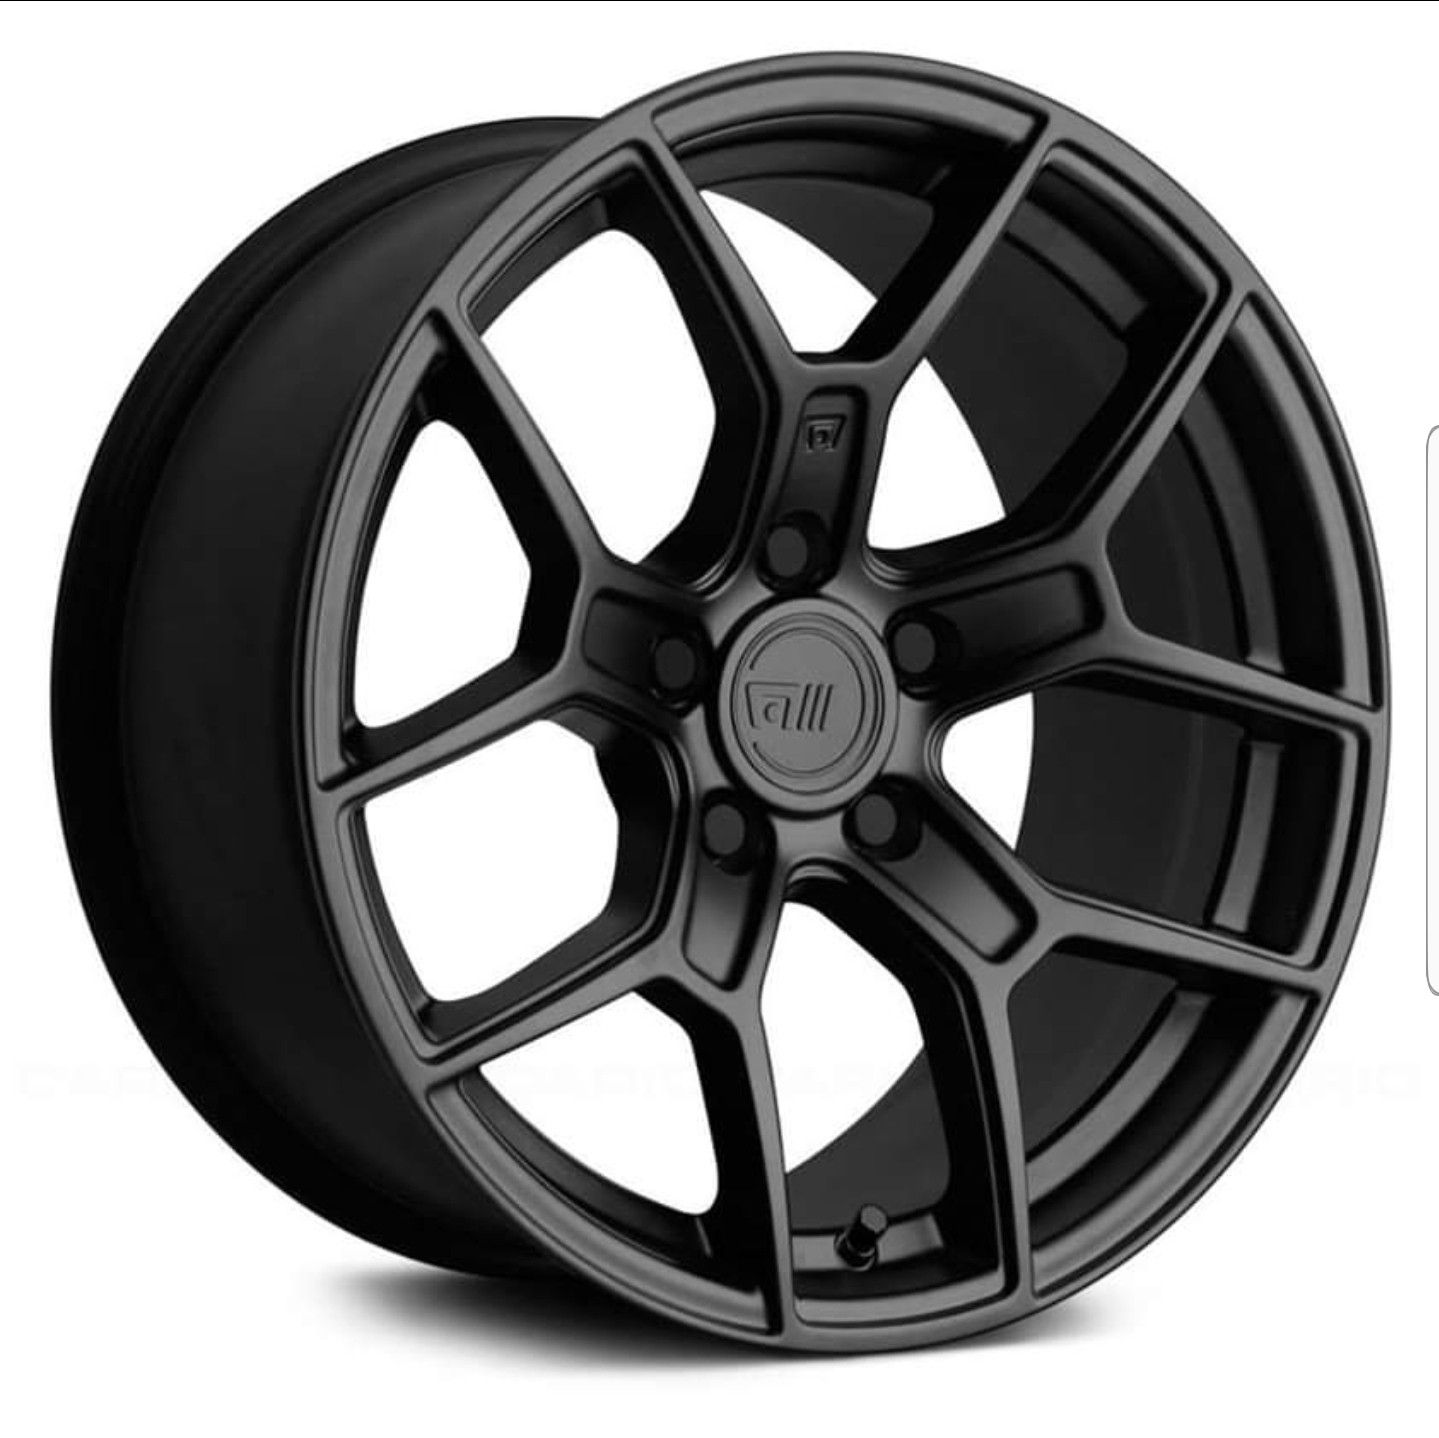 17" & 18" Motegi MR 133 in satin black, silver & gold wheel rim & tire packages available!